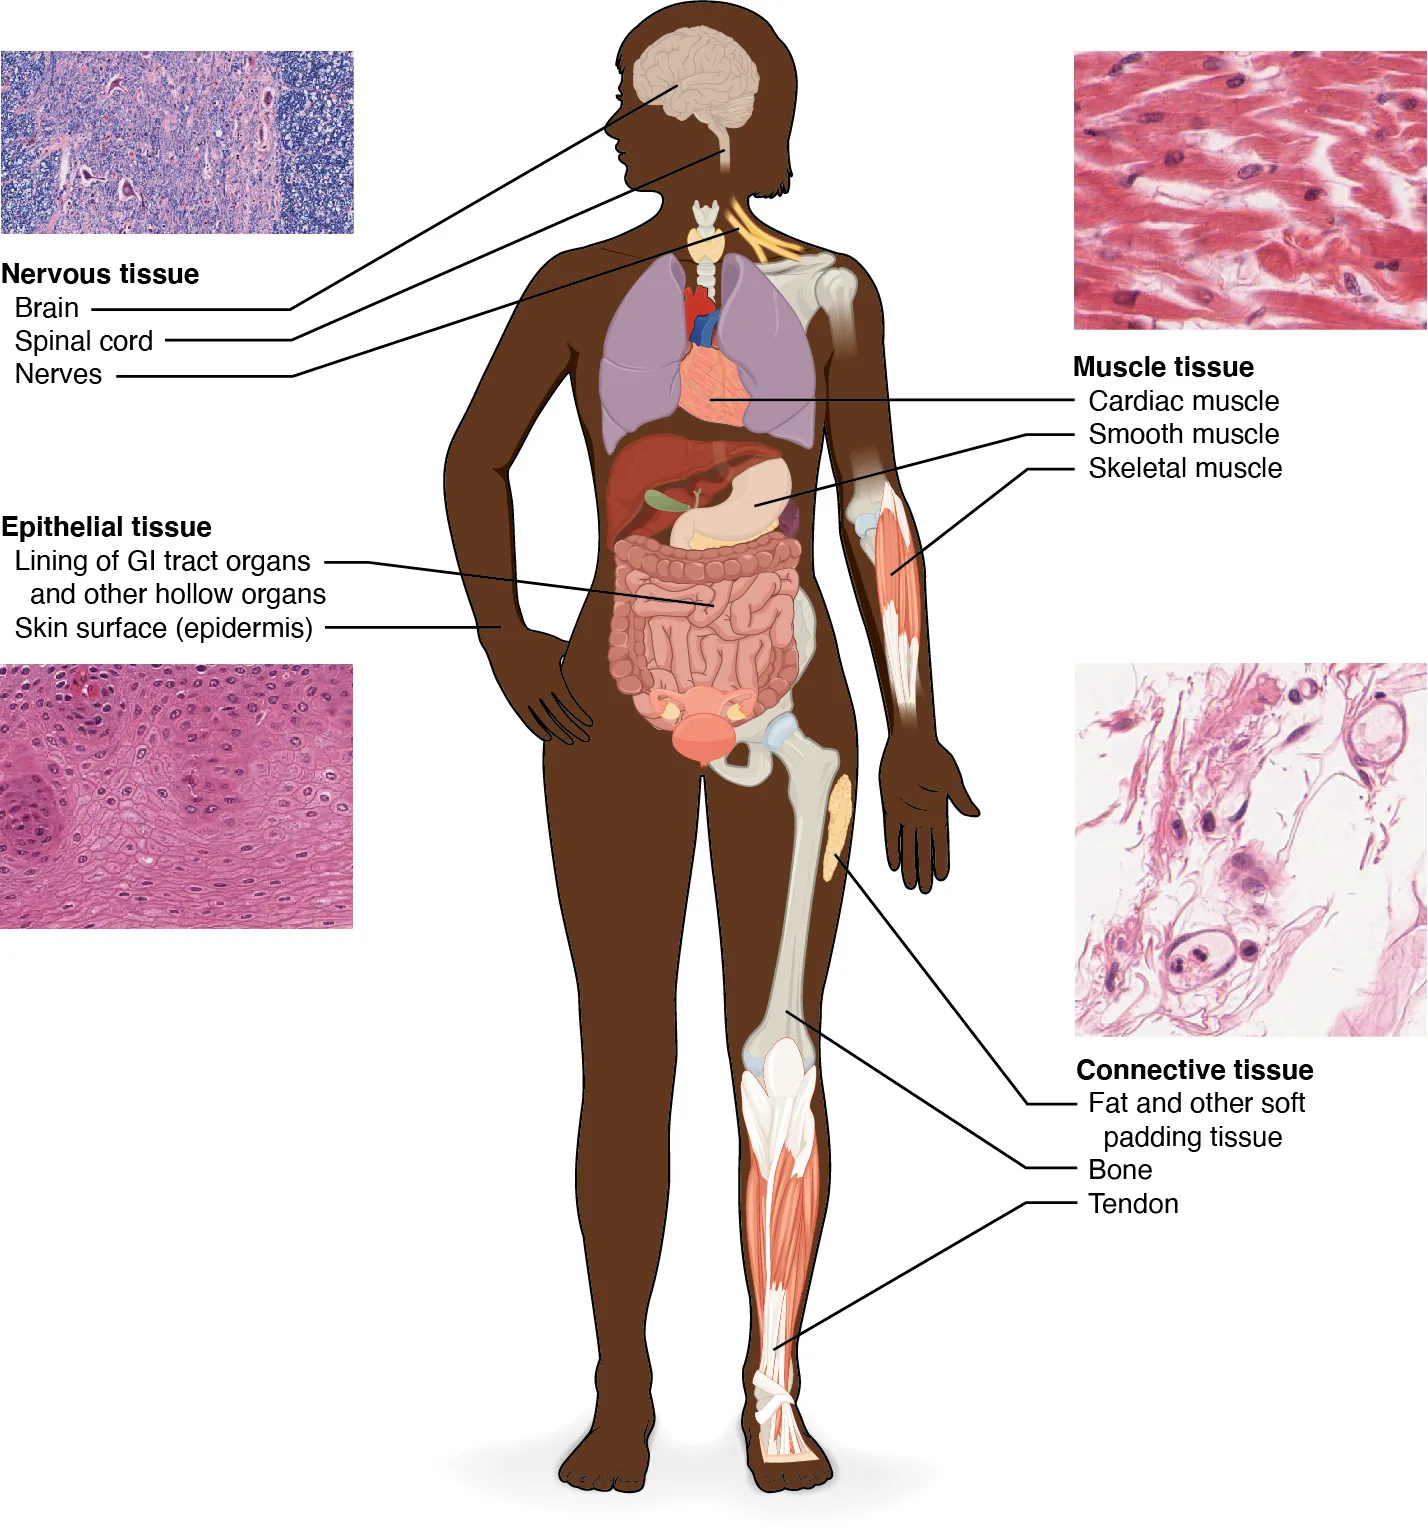 This diagram shows the silhouette of a female surrounded by four micrographs of tissue. Each micrograph has arrows pointing to the organs where that tissue is found. The upper left micrograph shows nervous tissue that is whitish with several large, purple, irregularly-shaped neurons embedded throughout. Nervous tissue is found in the brain, spinal cord and nerves. The upper right micrograph shows muscle tissue that is red with elongated cells and prominent, purple nuclei. Cardiac muscle is found in the heart. Smooth muscle is found in muscular internal organs, such as the stomach. Skeletal muscle is found in parts that are moved voluntarily, such as the arms. The lower left micrograph shows epithelial tissue. This tissue is purple with many round, purple cells with dark purple nuclei. Epithelial tissue is found in the lining of GI tract organs and other hollow organs such as the small intestine. Epithelial tissue also composes the outer layer of the skin, known as the epidermis. Finally, the lower right micrograph shows connective tissue, which is composed of very loosely packed purple cells and fibers. There are large open spaces between clumps of cells and fibers. Connective tissue is found in the leg within fat and other soft padding tissue as well as bones and tendons.